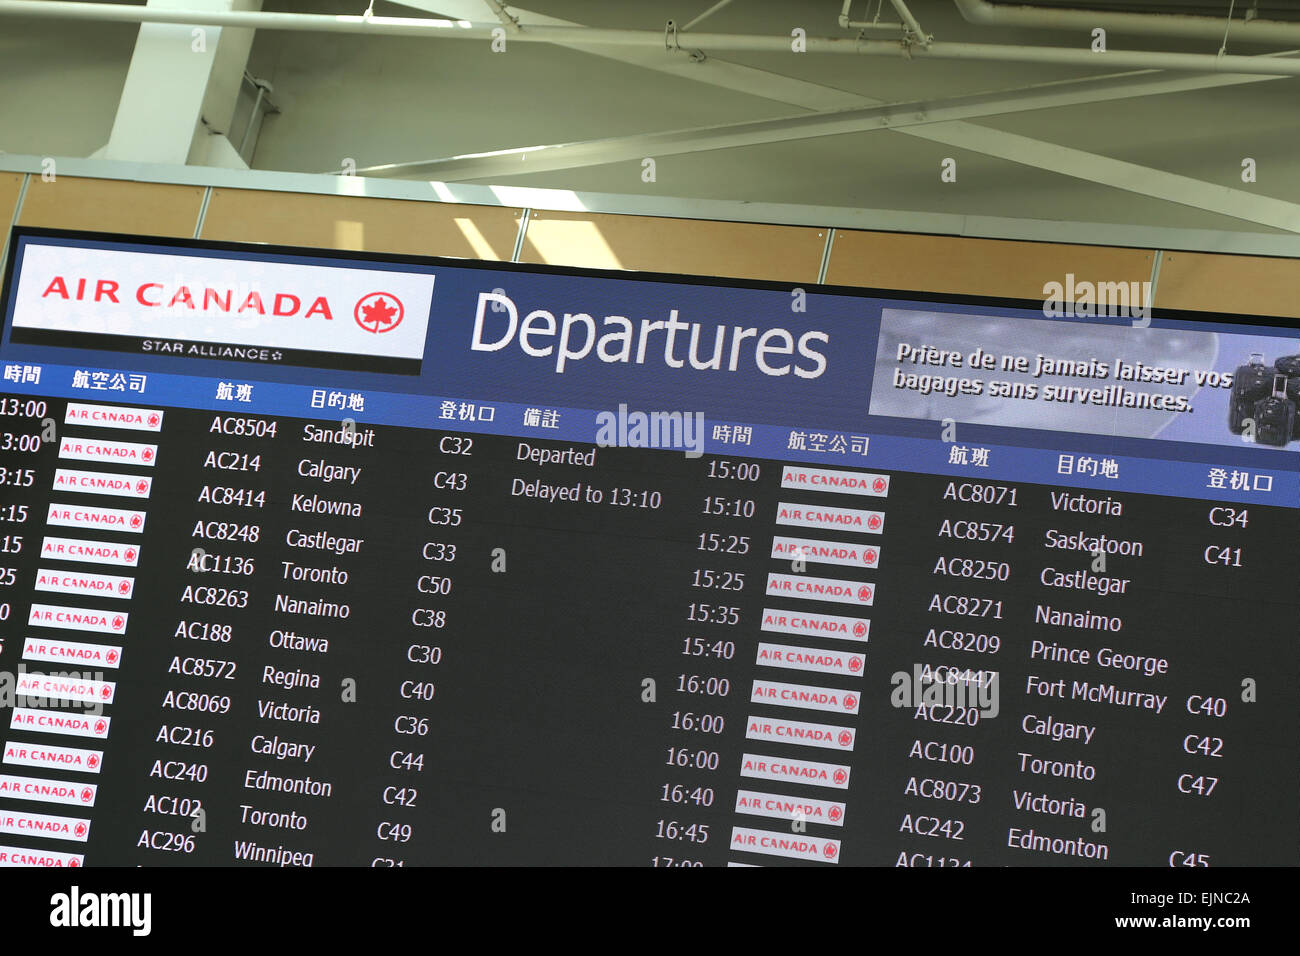 Vancouver, BC Canada - September 13, 2014 : Macro airport departures monitor showing flight gate in Vancouver BC Canada. Stock Photo